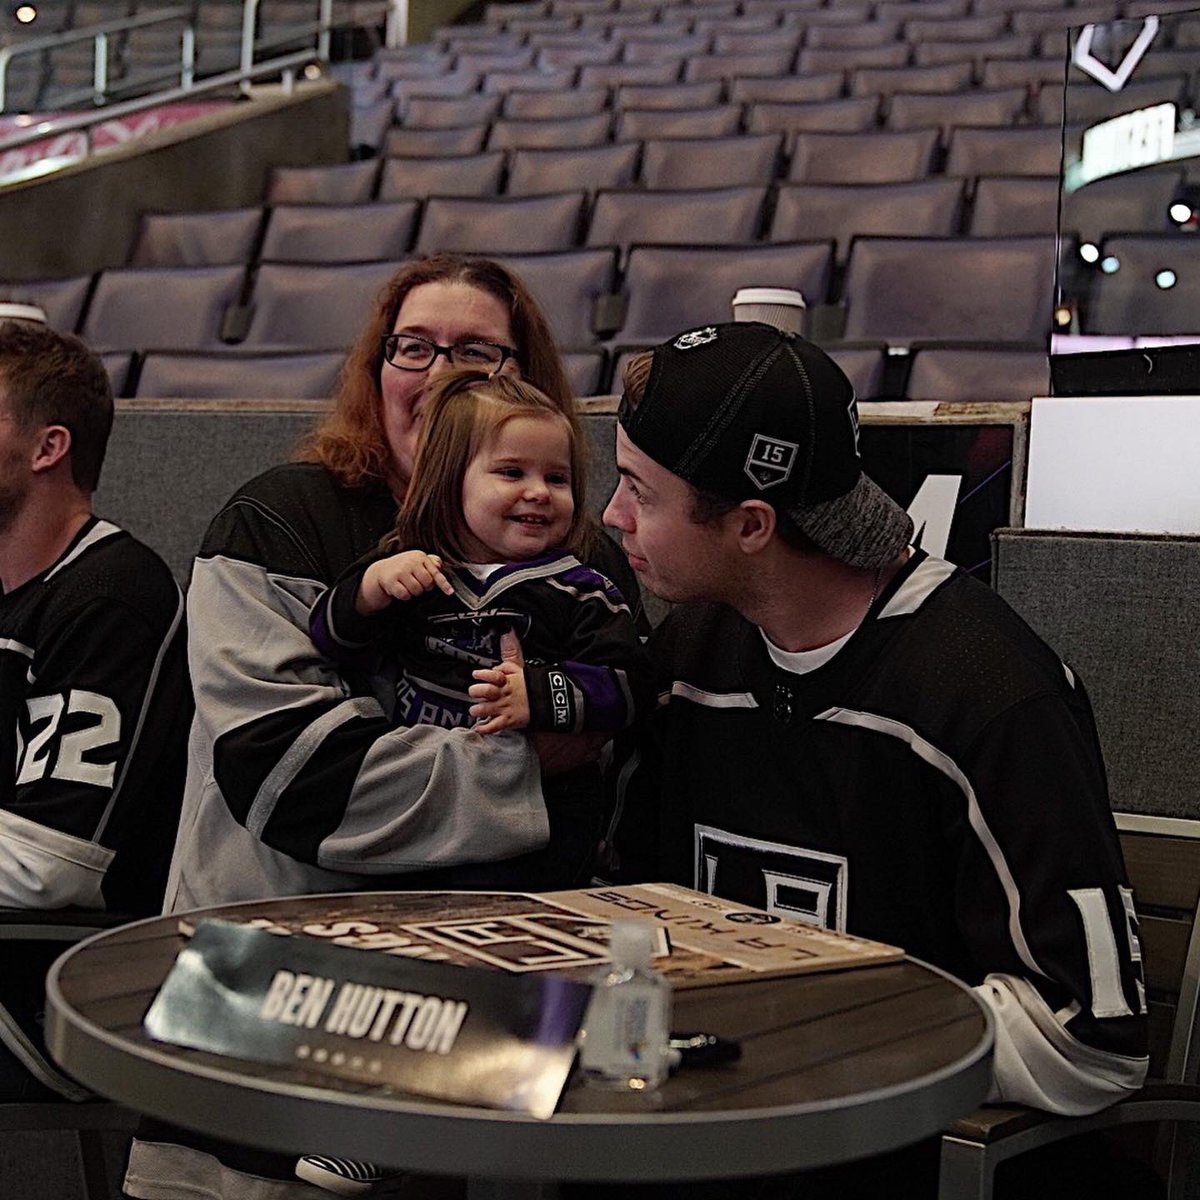 We hear @bhutt10 makes a great babysitter if anyone needs one.